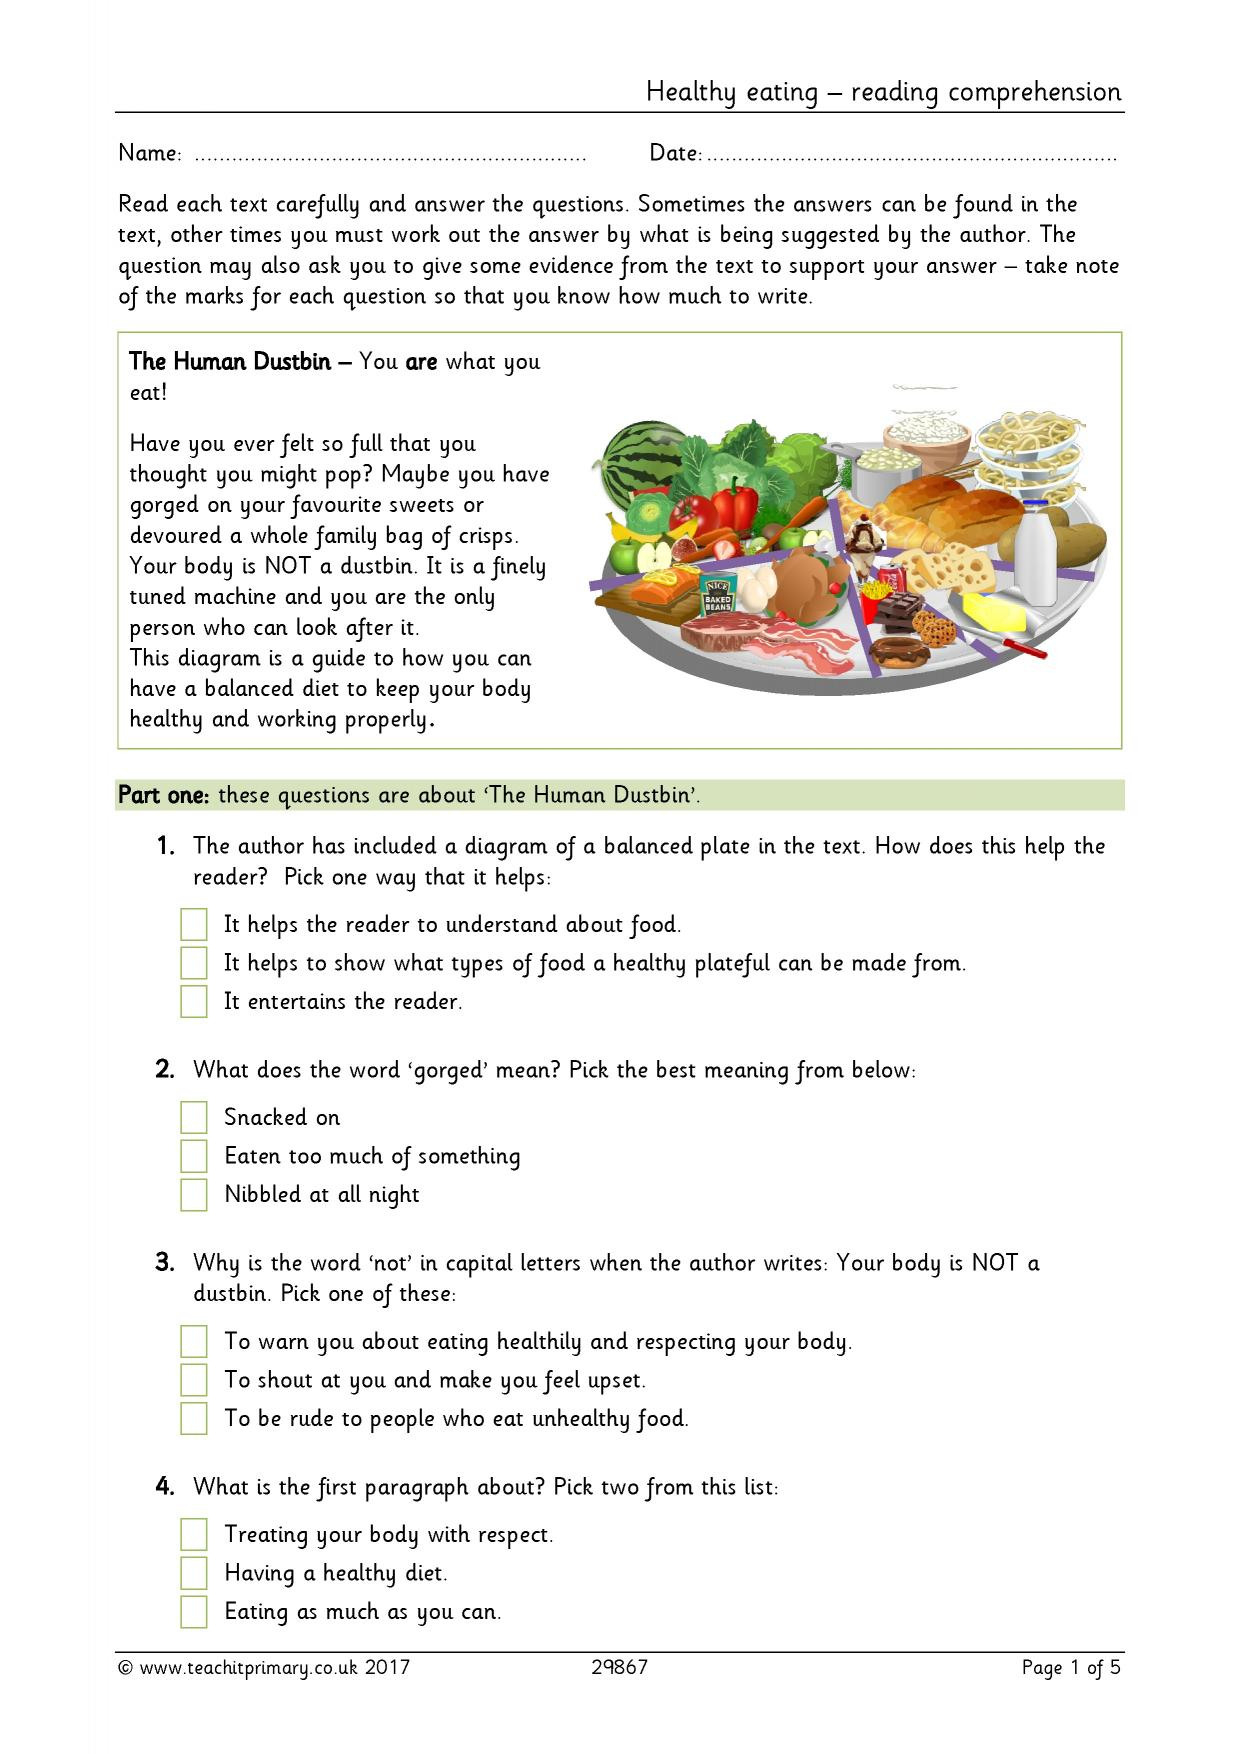 healthy-eating-reading-comprehension-food-lifestyle-health-db-excel